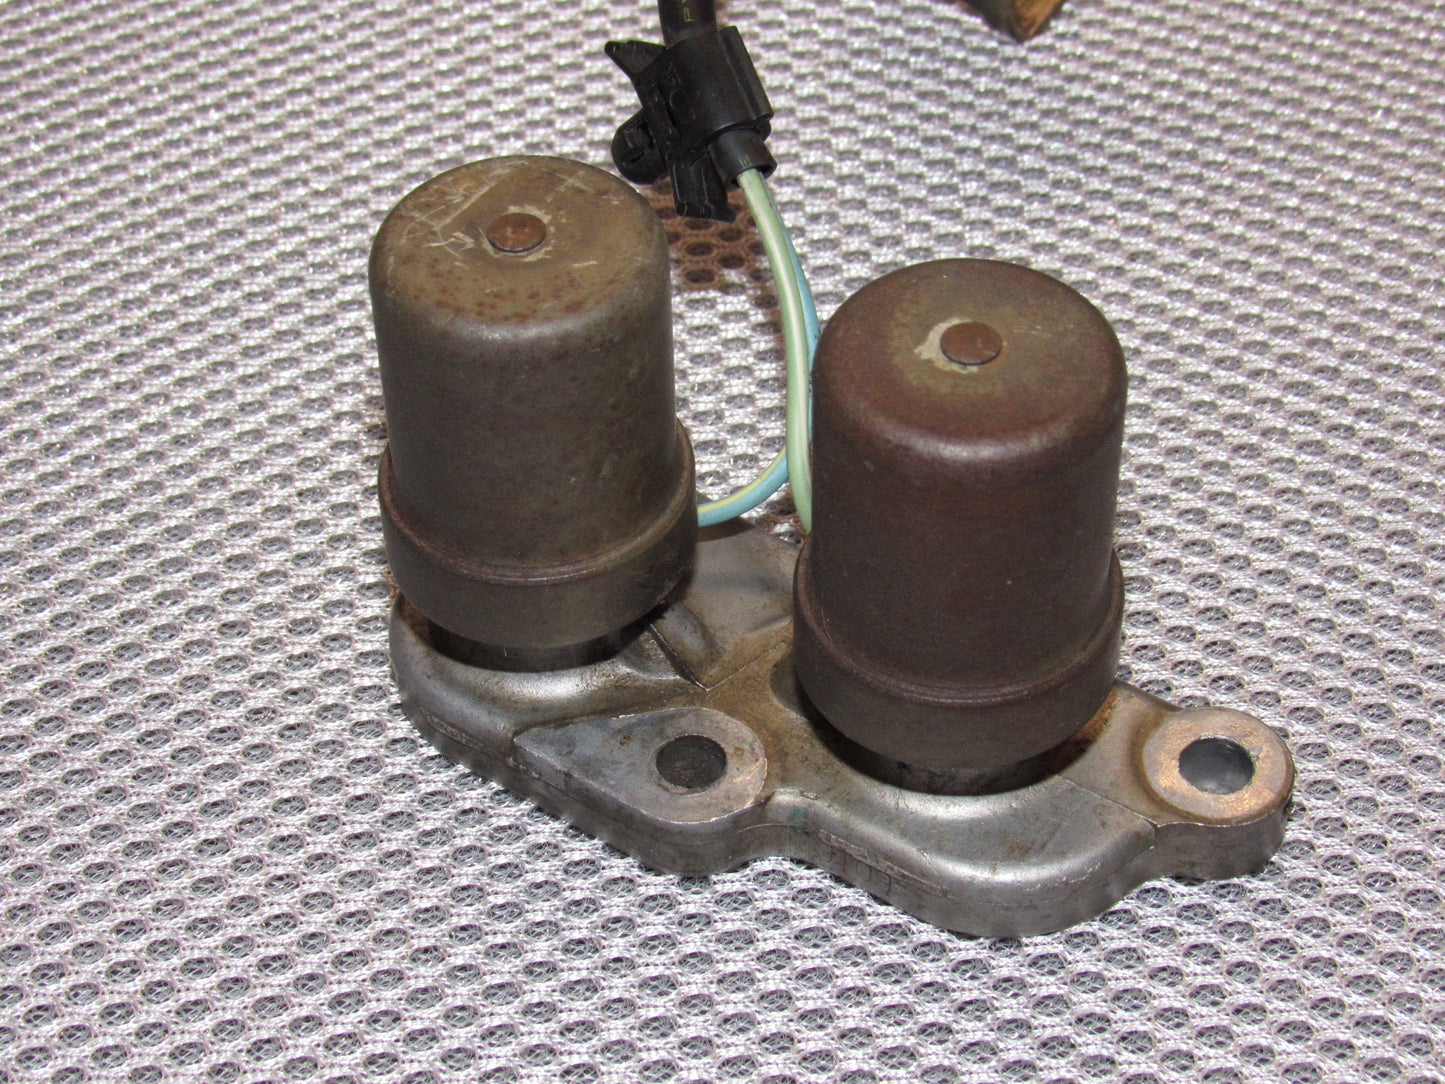 00 01 Acura Integra OEM A/T Shift Control Solenoid Valve Assembly